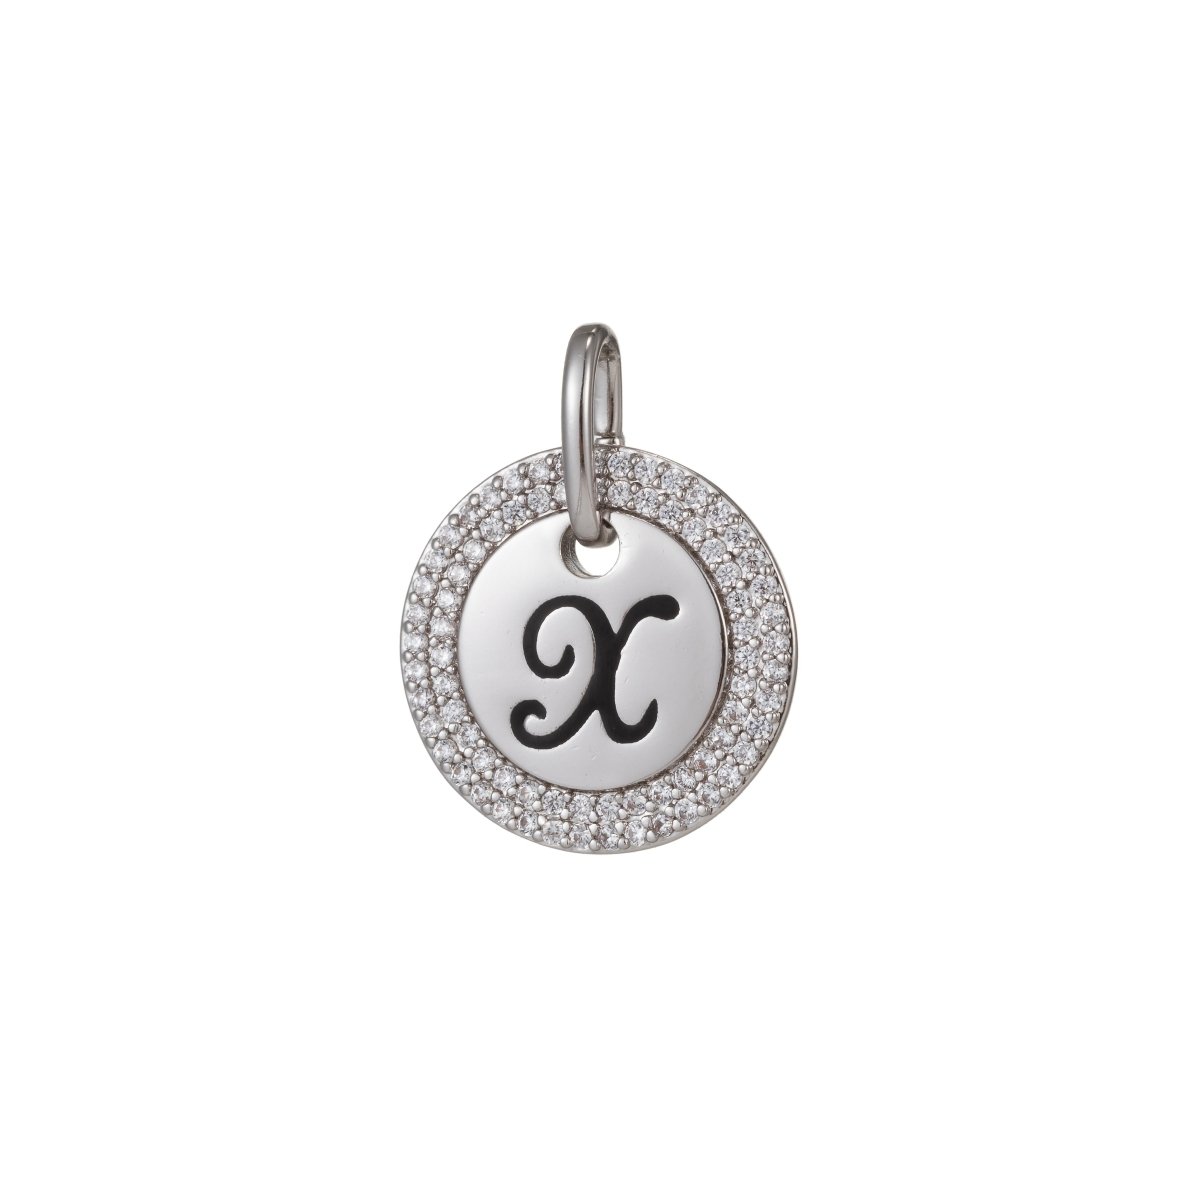 White Gold Filled Micro Pave CZ Initial Letters Pendant Charm, White Gold Filled Letter Pendant, For DIY Jewelry Necklace Making A-141 to A-153 - DLUXCA